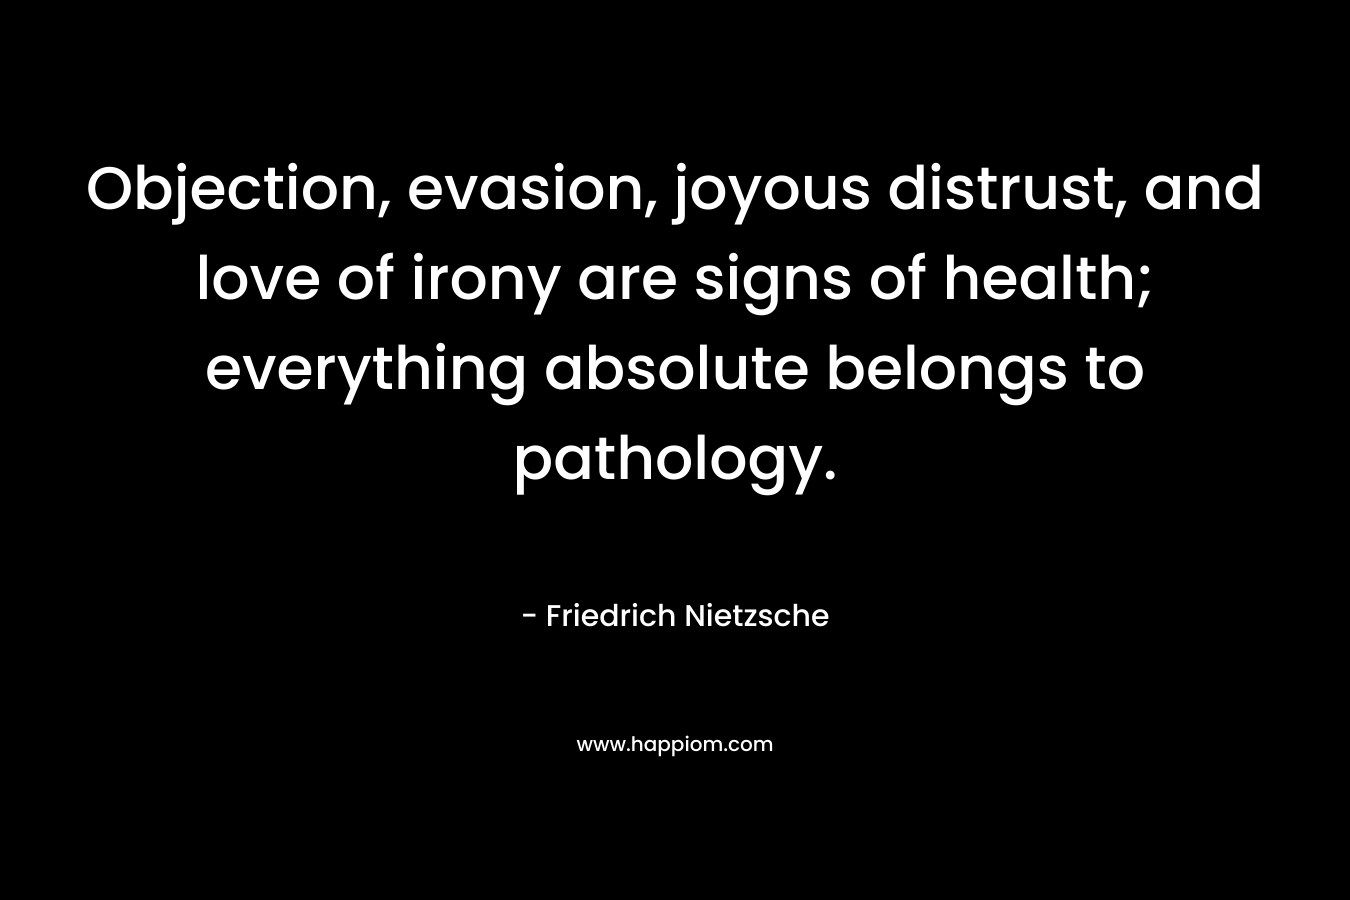 Objection, evasion, joyous distrust, and love of irony are signs of health; everything absolute belongs to pathology.